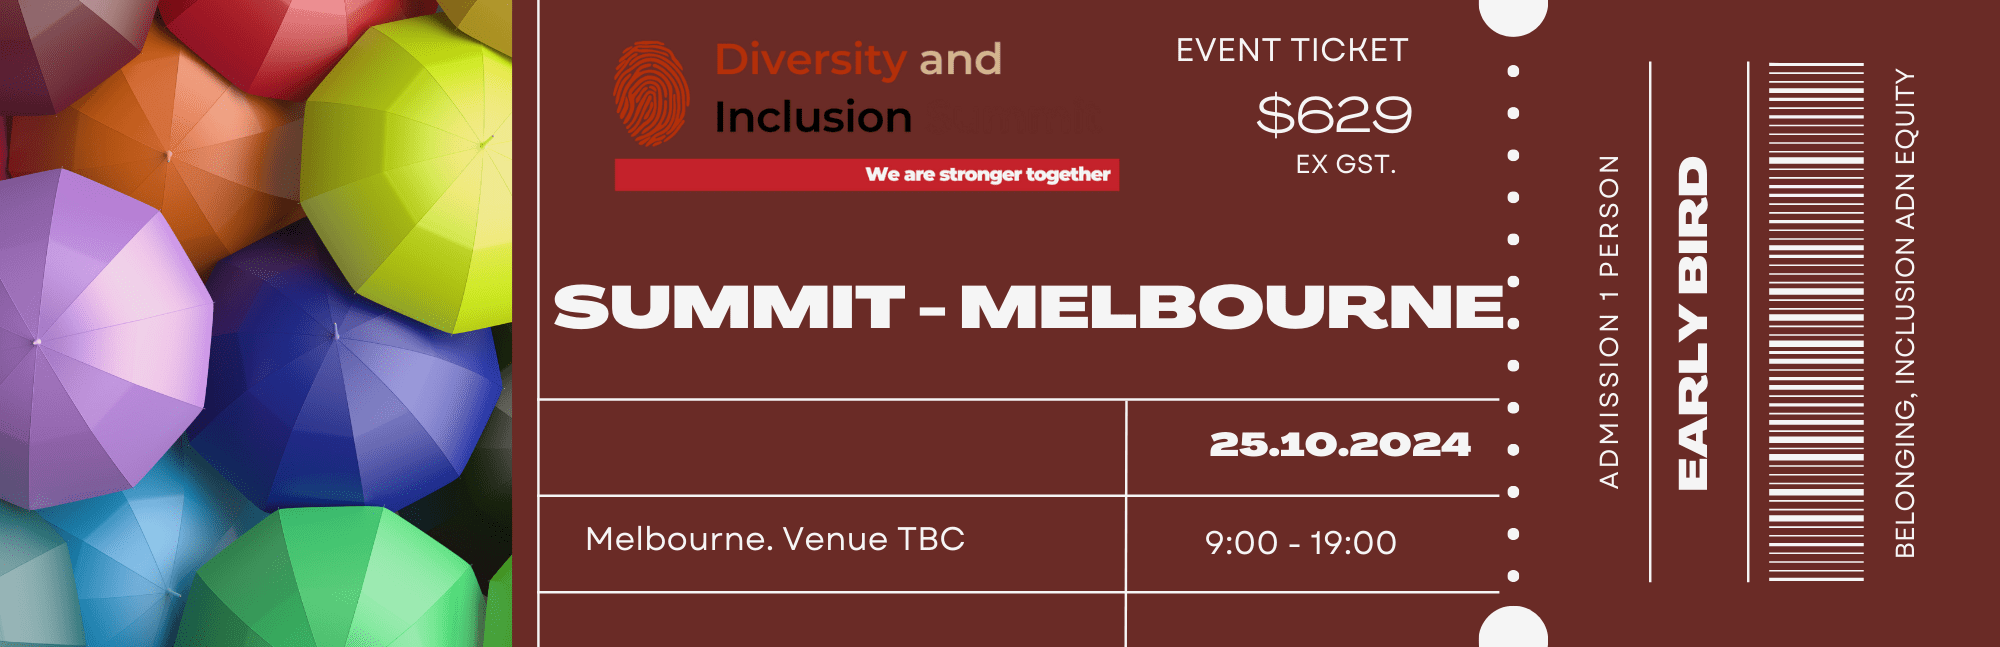 Melbourne Summit 25 October 2024 (Single Ticket) Diversity and